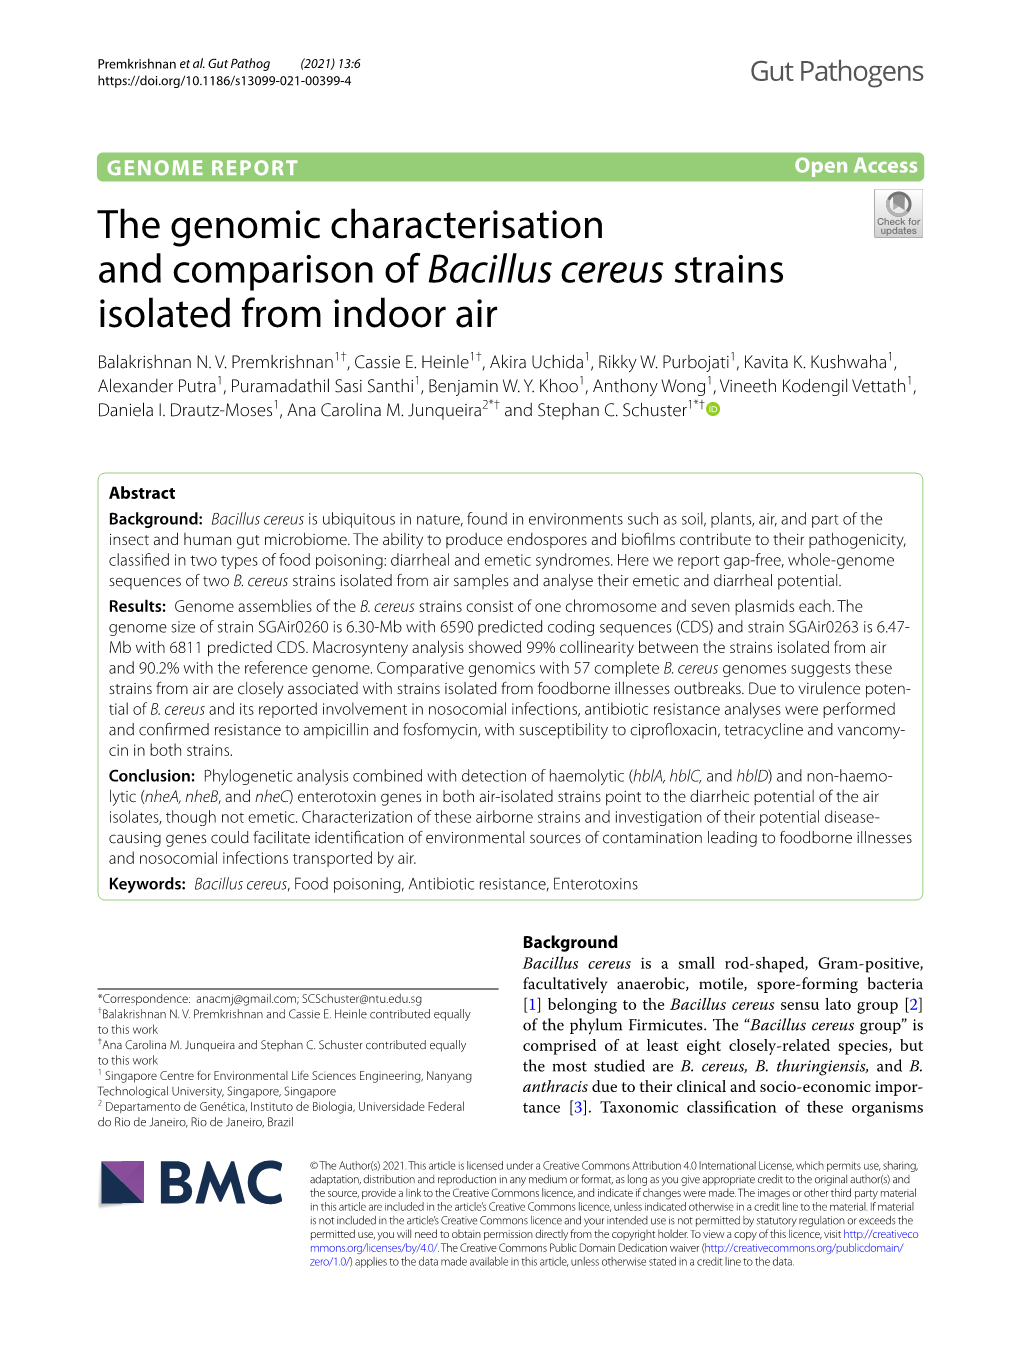 The Genomic Characterisation and Comparison of Bacillus Cereus Strains Isolated from Indoor Air Balakrishnan N